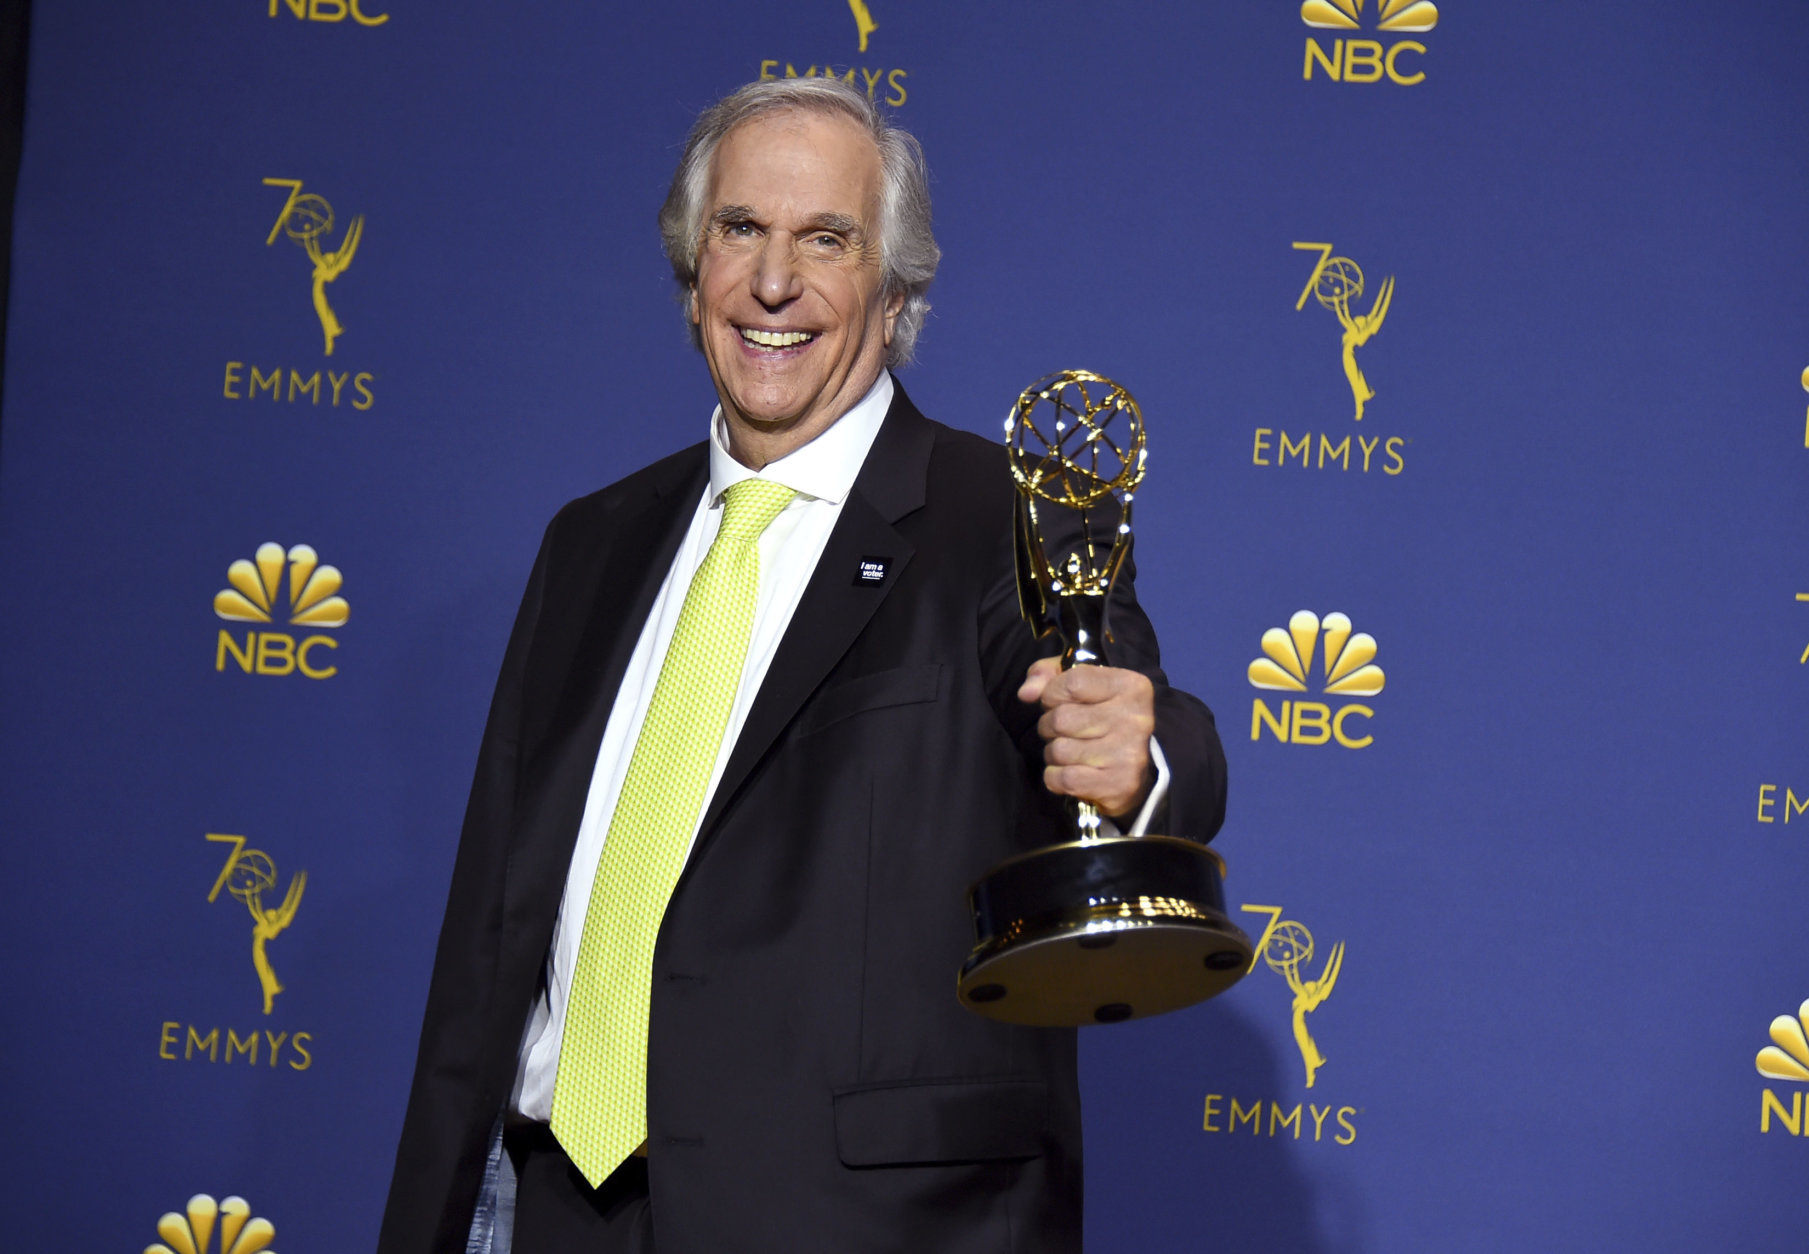 Henry Winkler poses in the press room with the award for outstanding supporting actor in a comedy series for "Barry" at the 70th Primetime Emmy Awards on Monday, Sept. 17, 2018, at the Microsoft Theater in Los Angeles. (Photo by Jordan Strauss/Invision/AP)